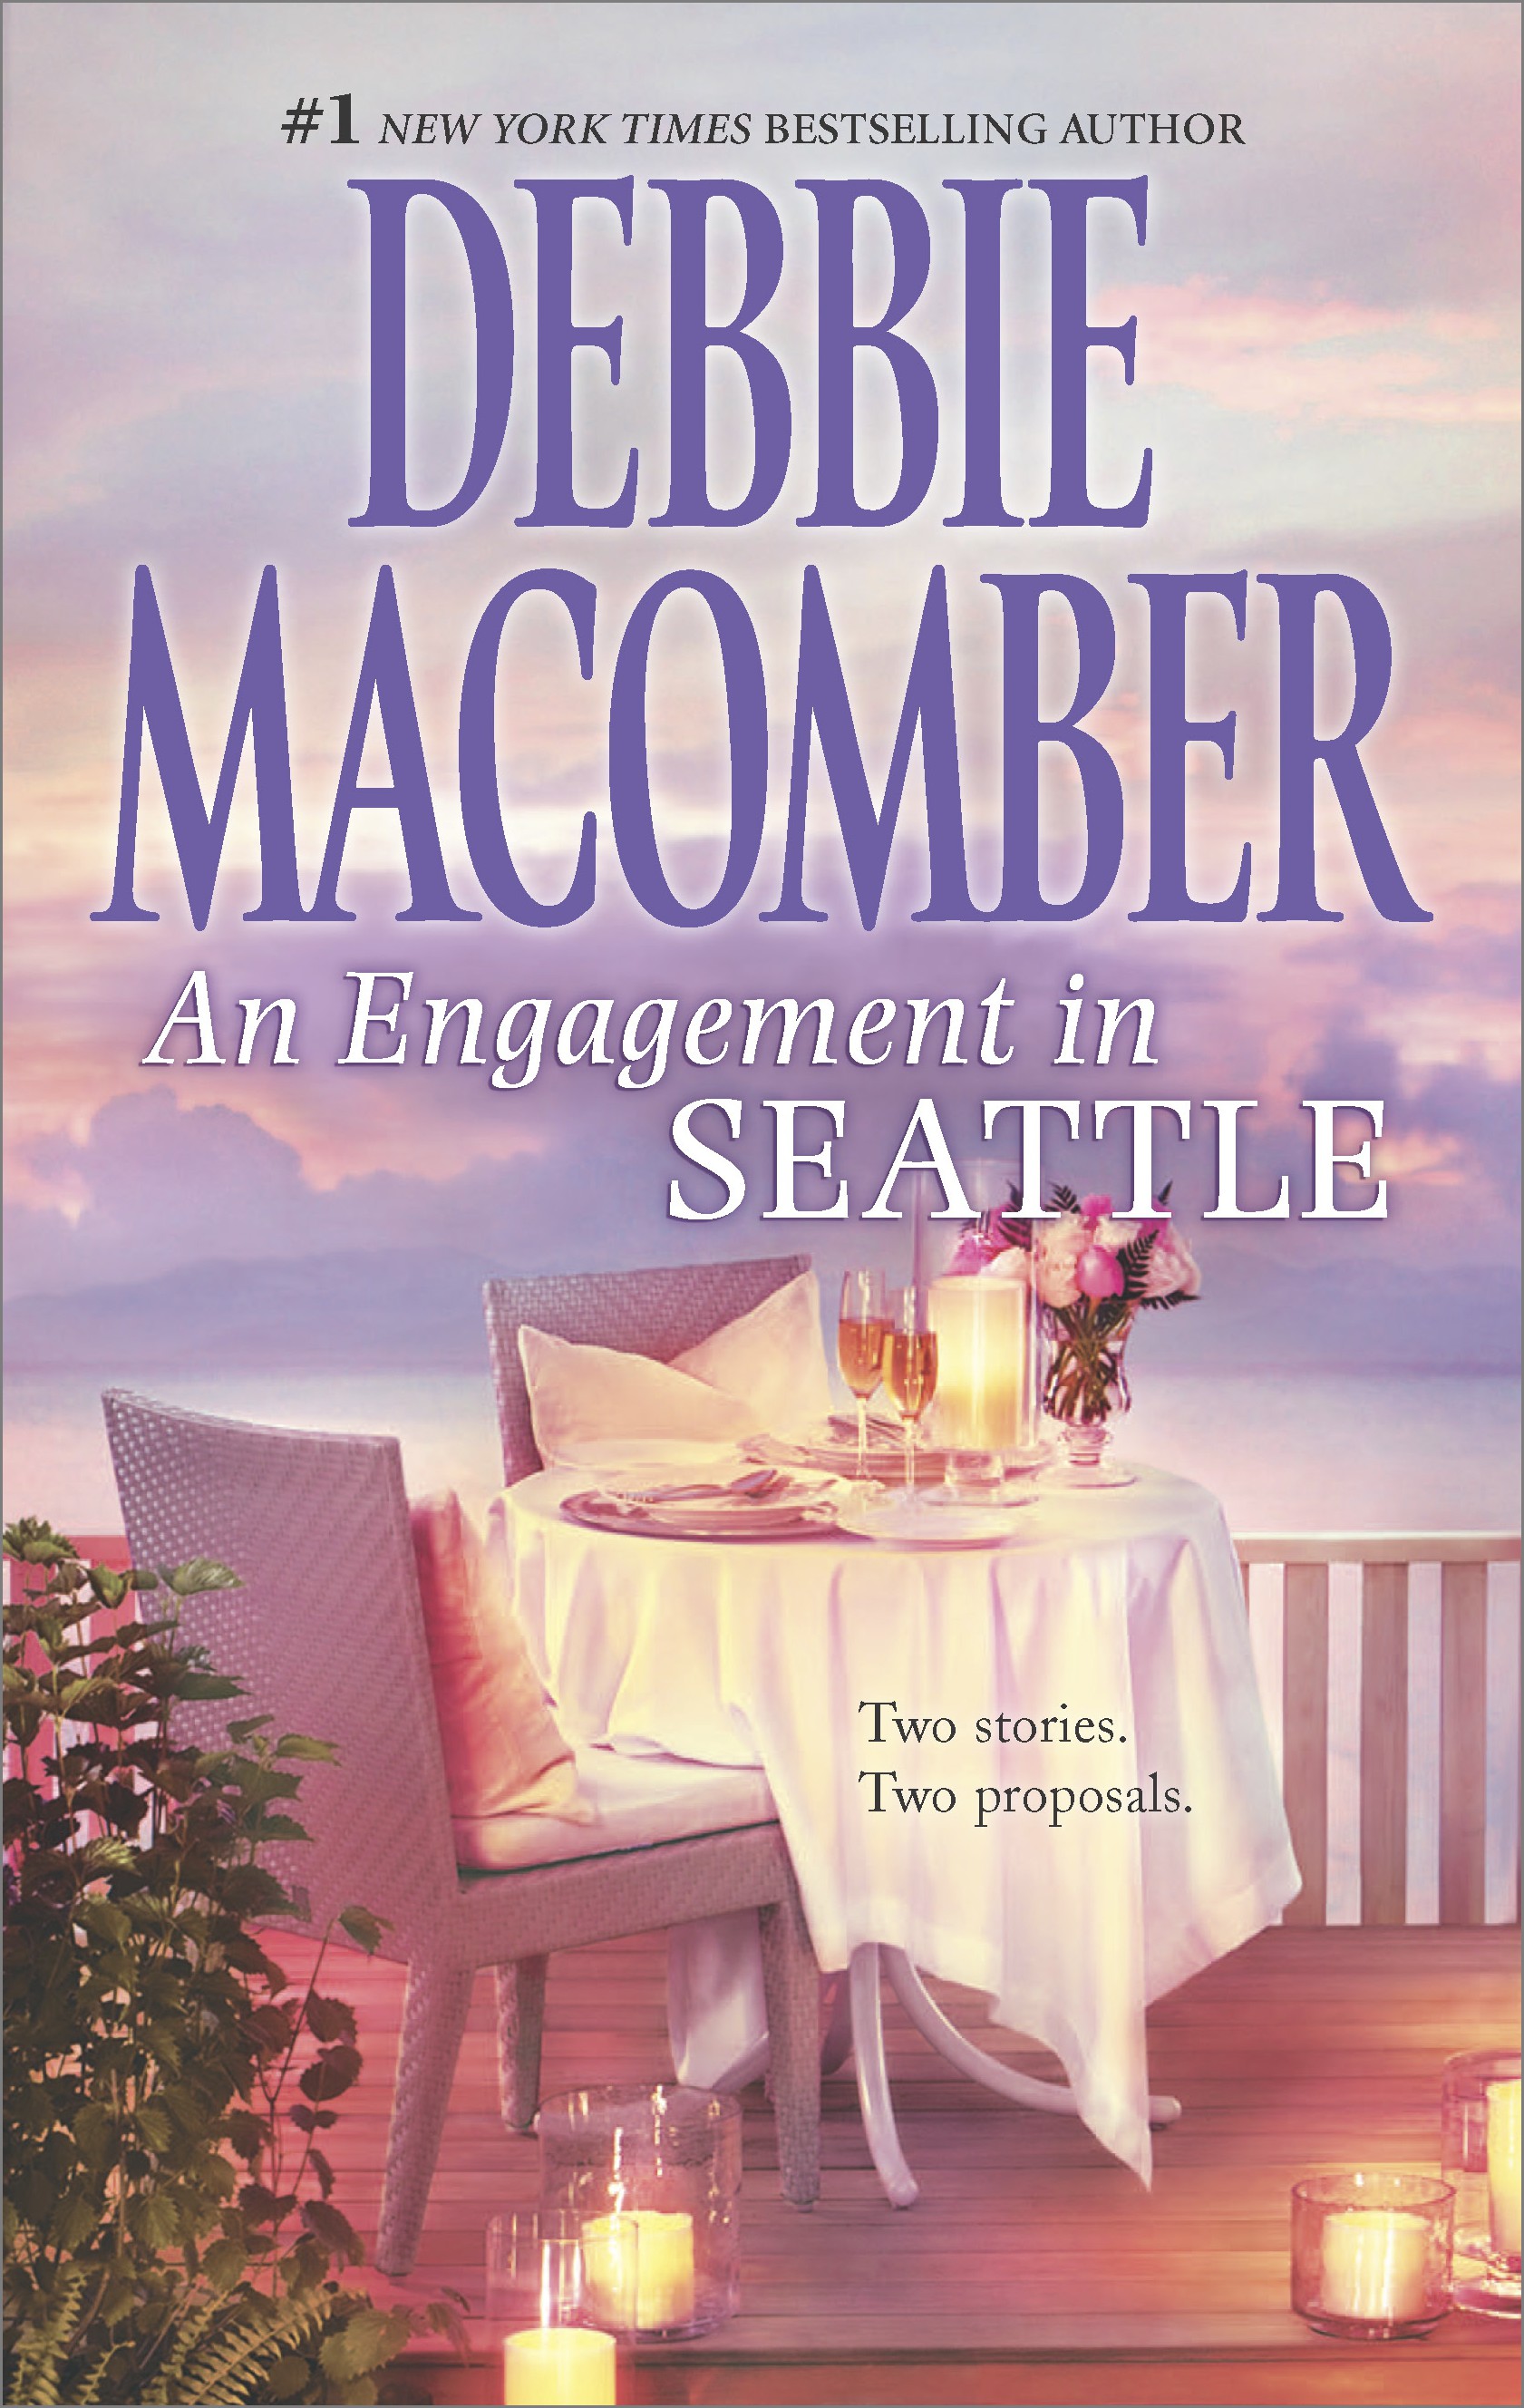 An engagement in Seattle cover image